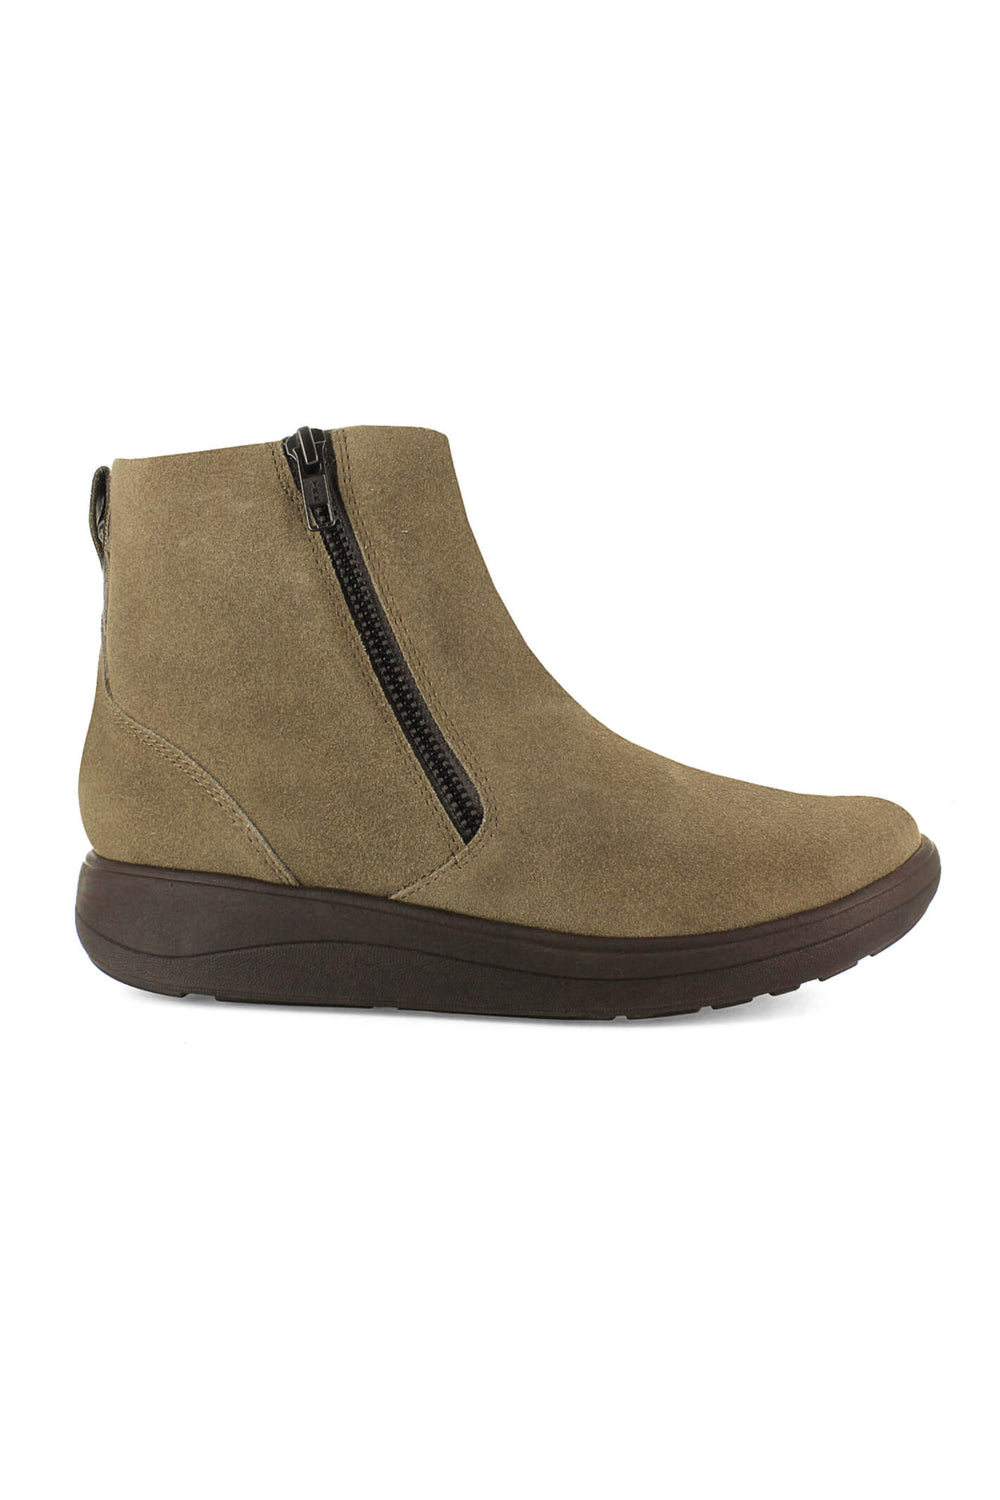 Strive Bamford II Taupe Zip Up Leather Boots - Shirley Allum Boutique